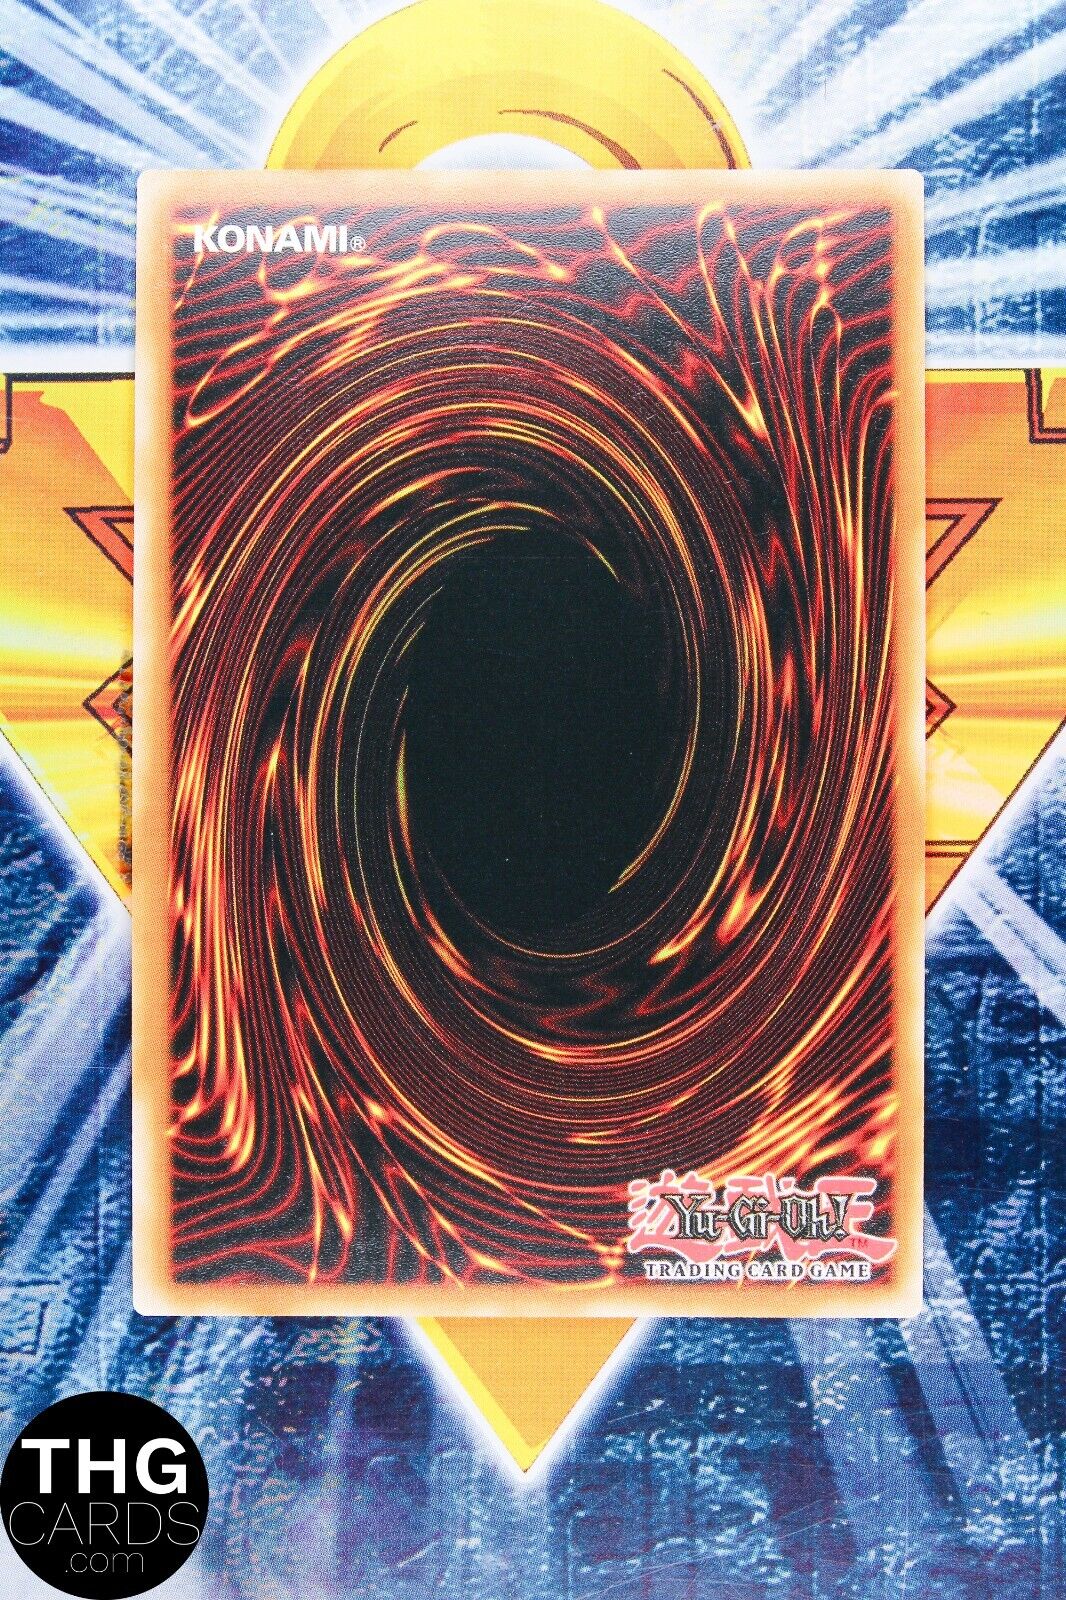 Reinforcement of the Army RA01-EN051 1st Edition Super Rare Yugioh Card Playset